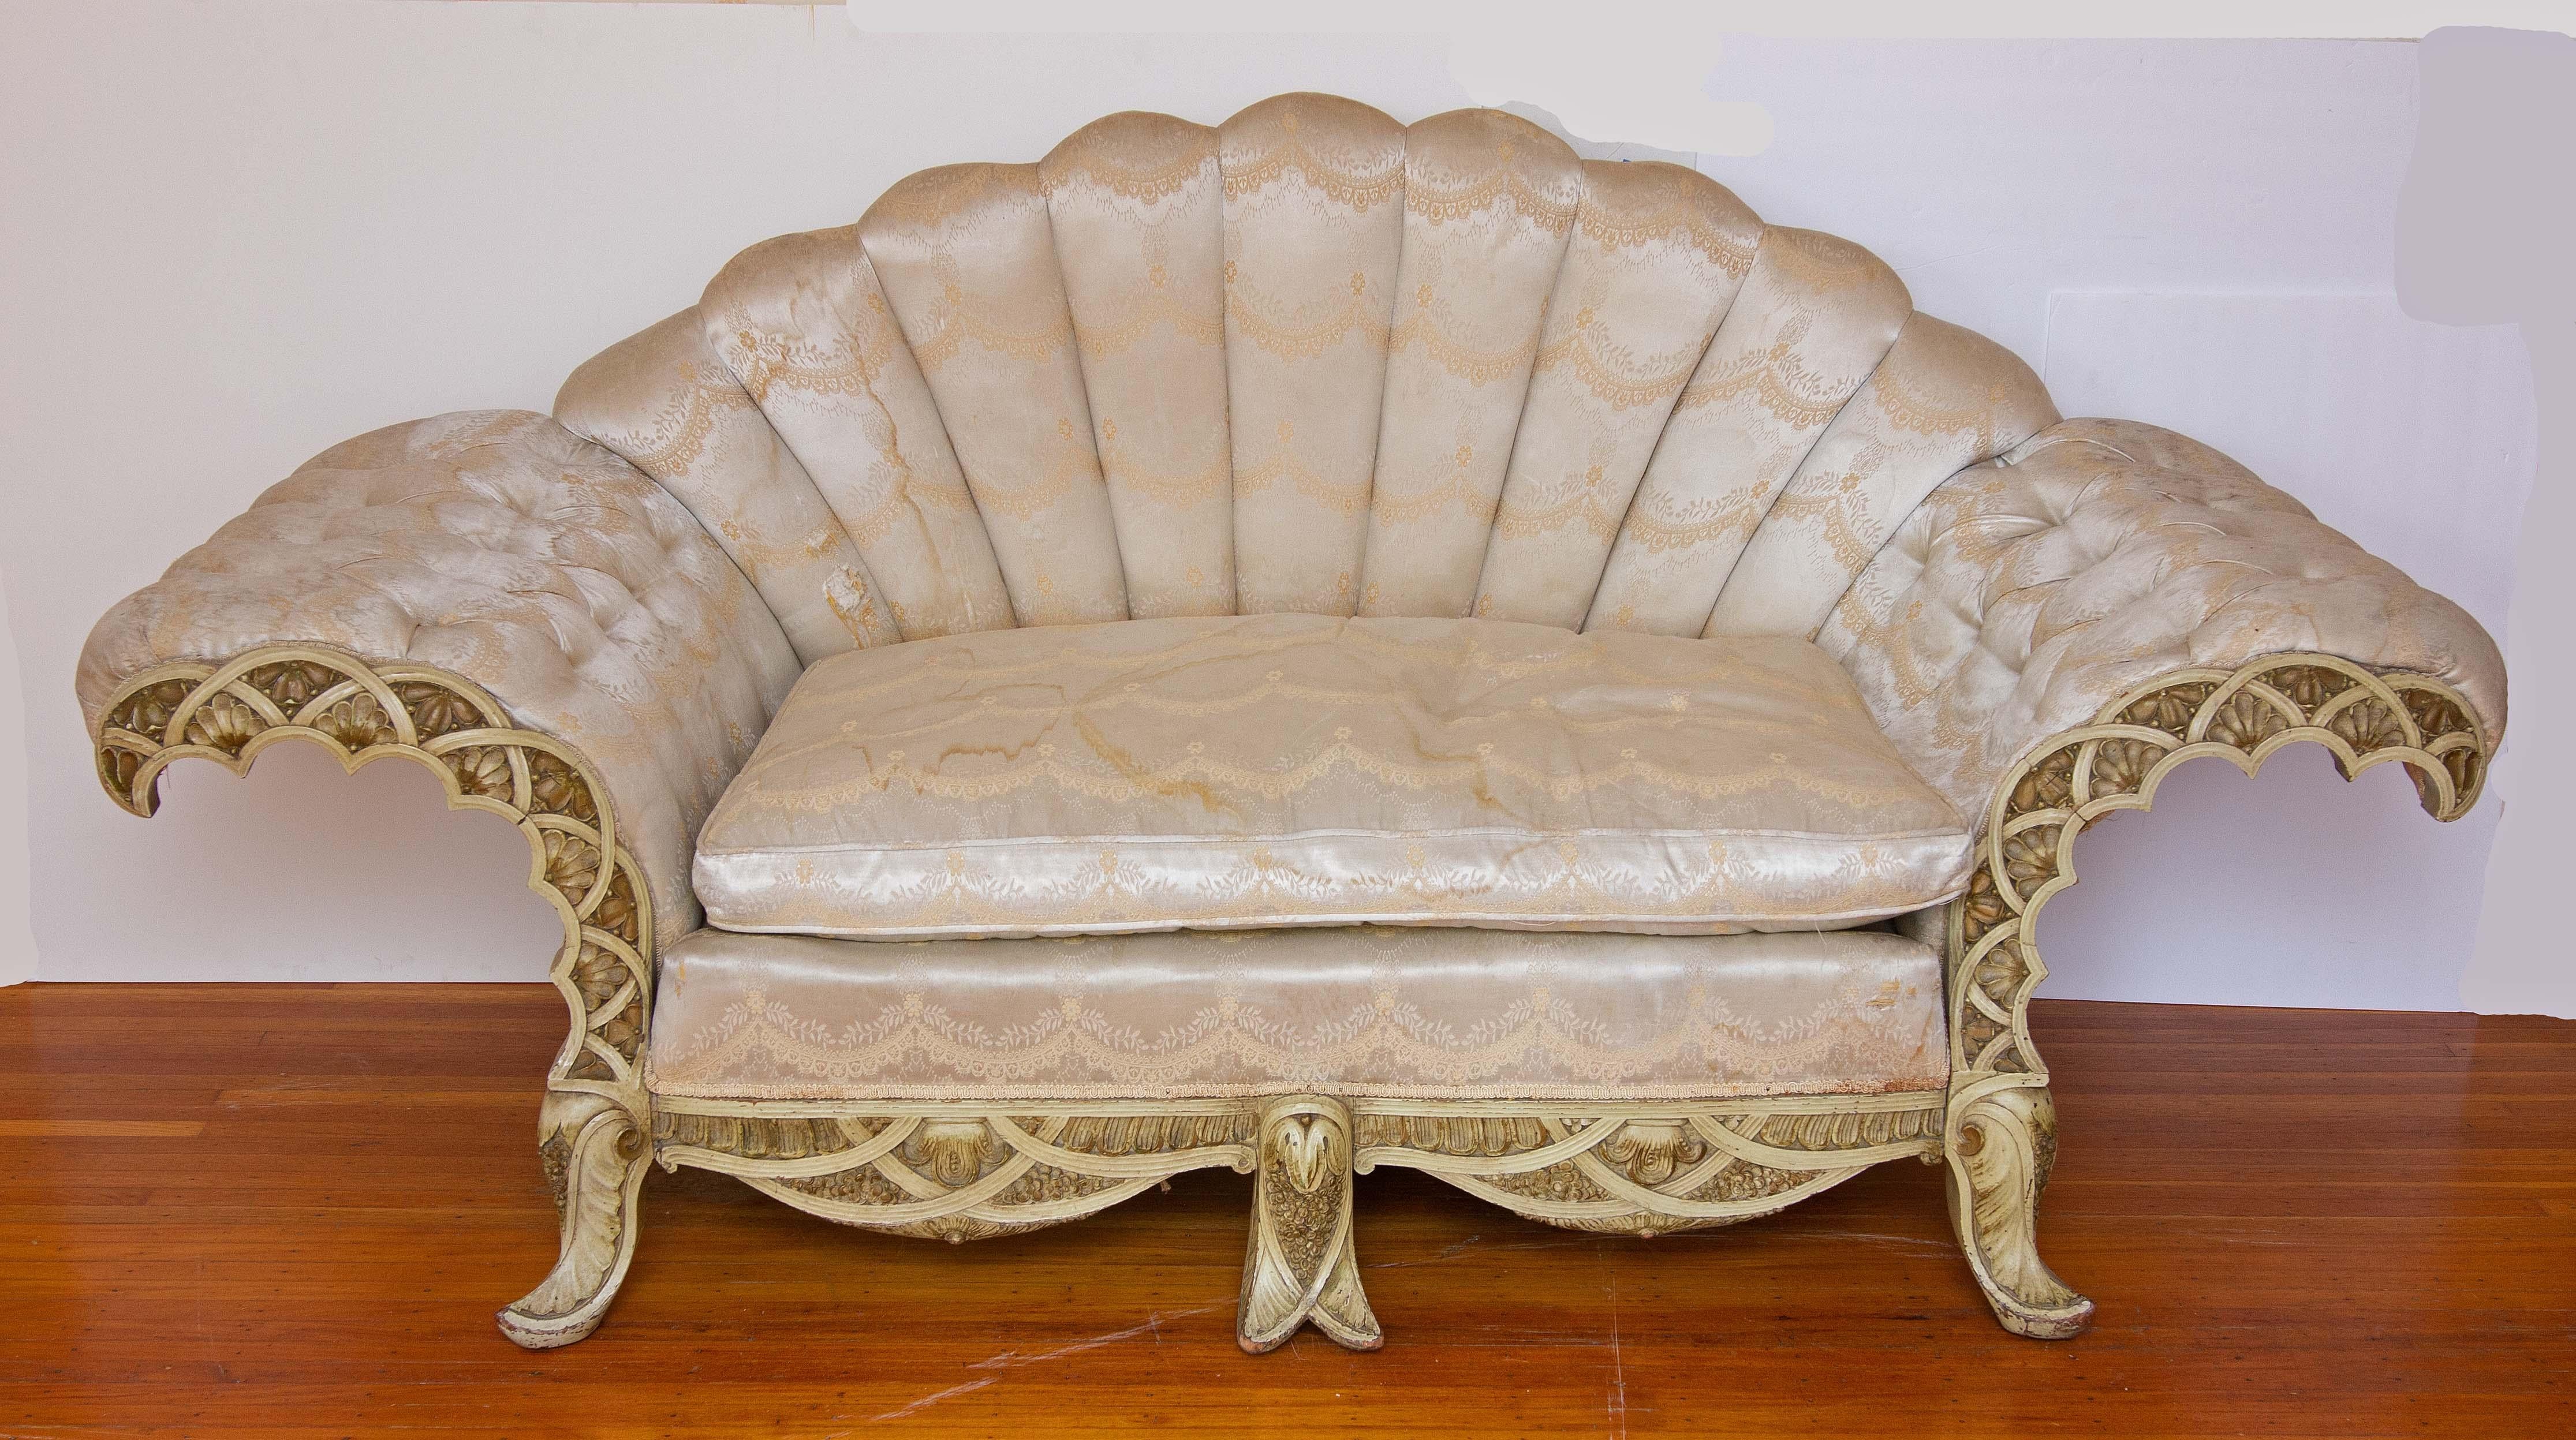 Exotic Venetian sofa. Lavishly carved and painted Venetian sofa. 19th century. Dramatic design. Please, contact us for shipping options.
Presented Joseph Dasta Antiques
 